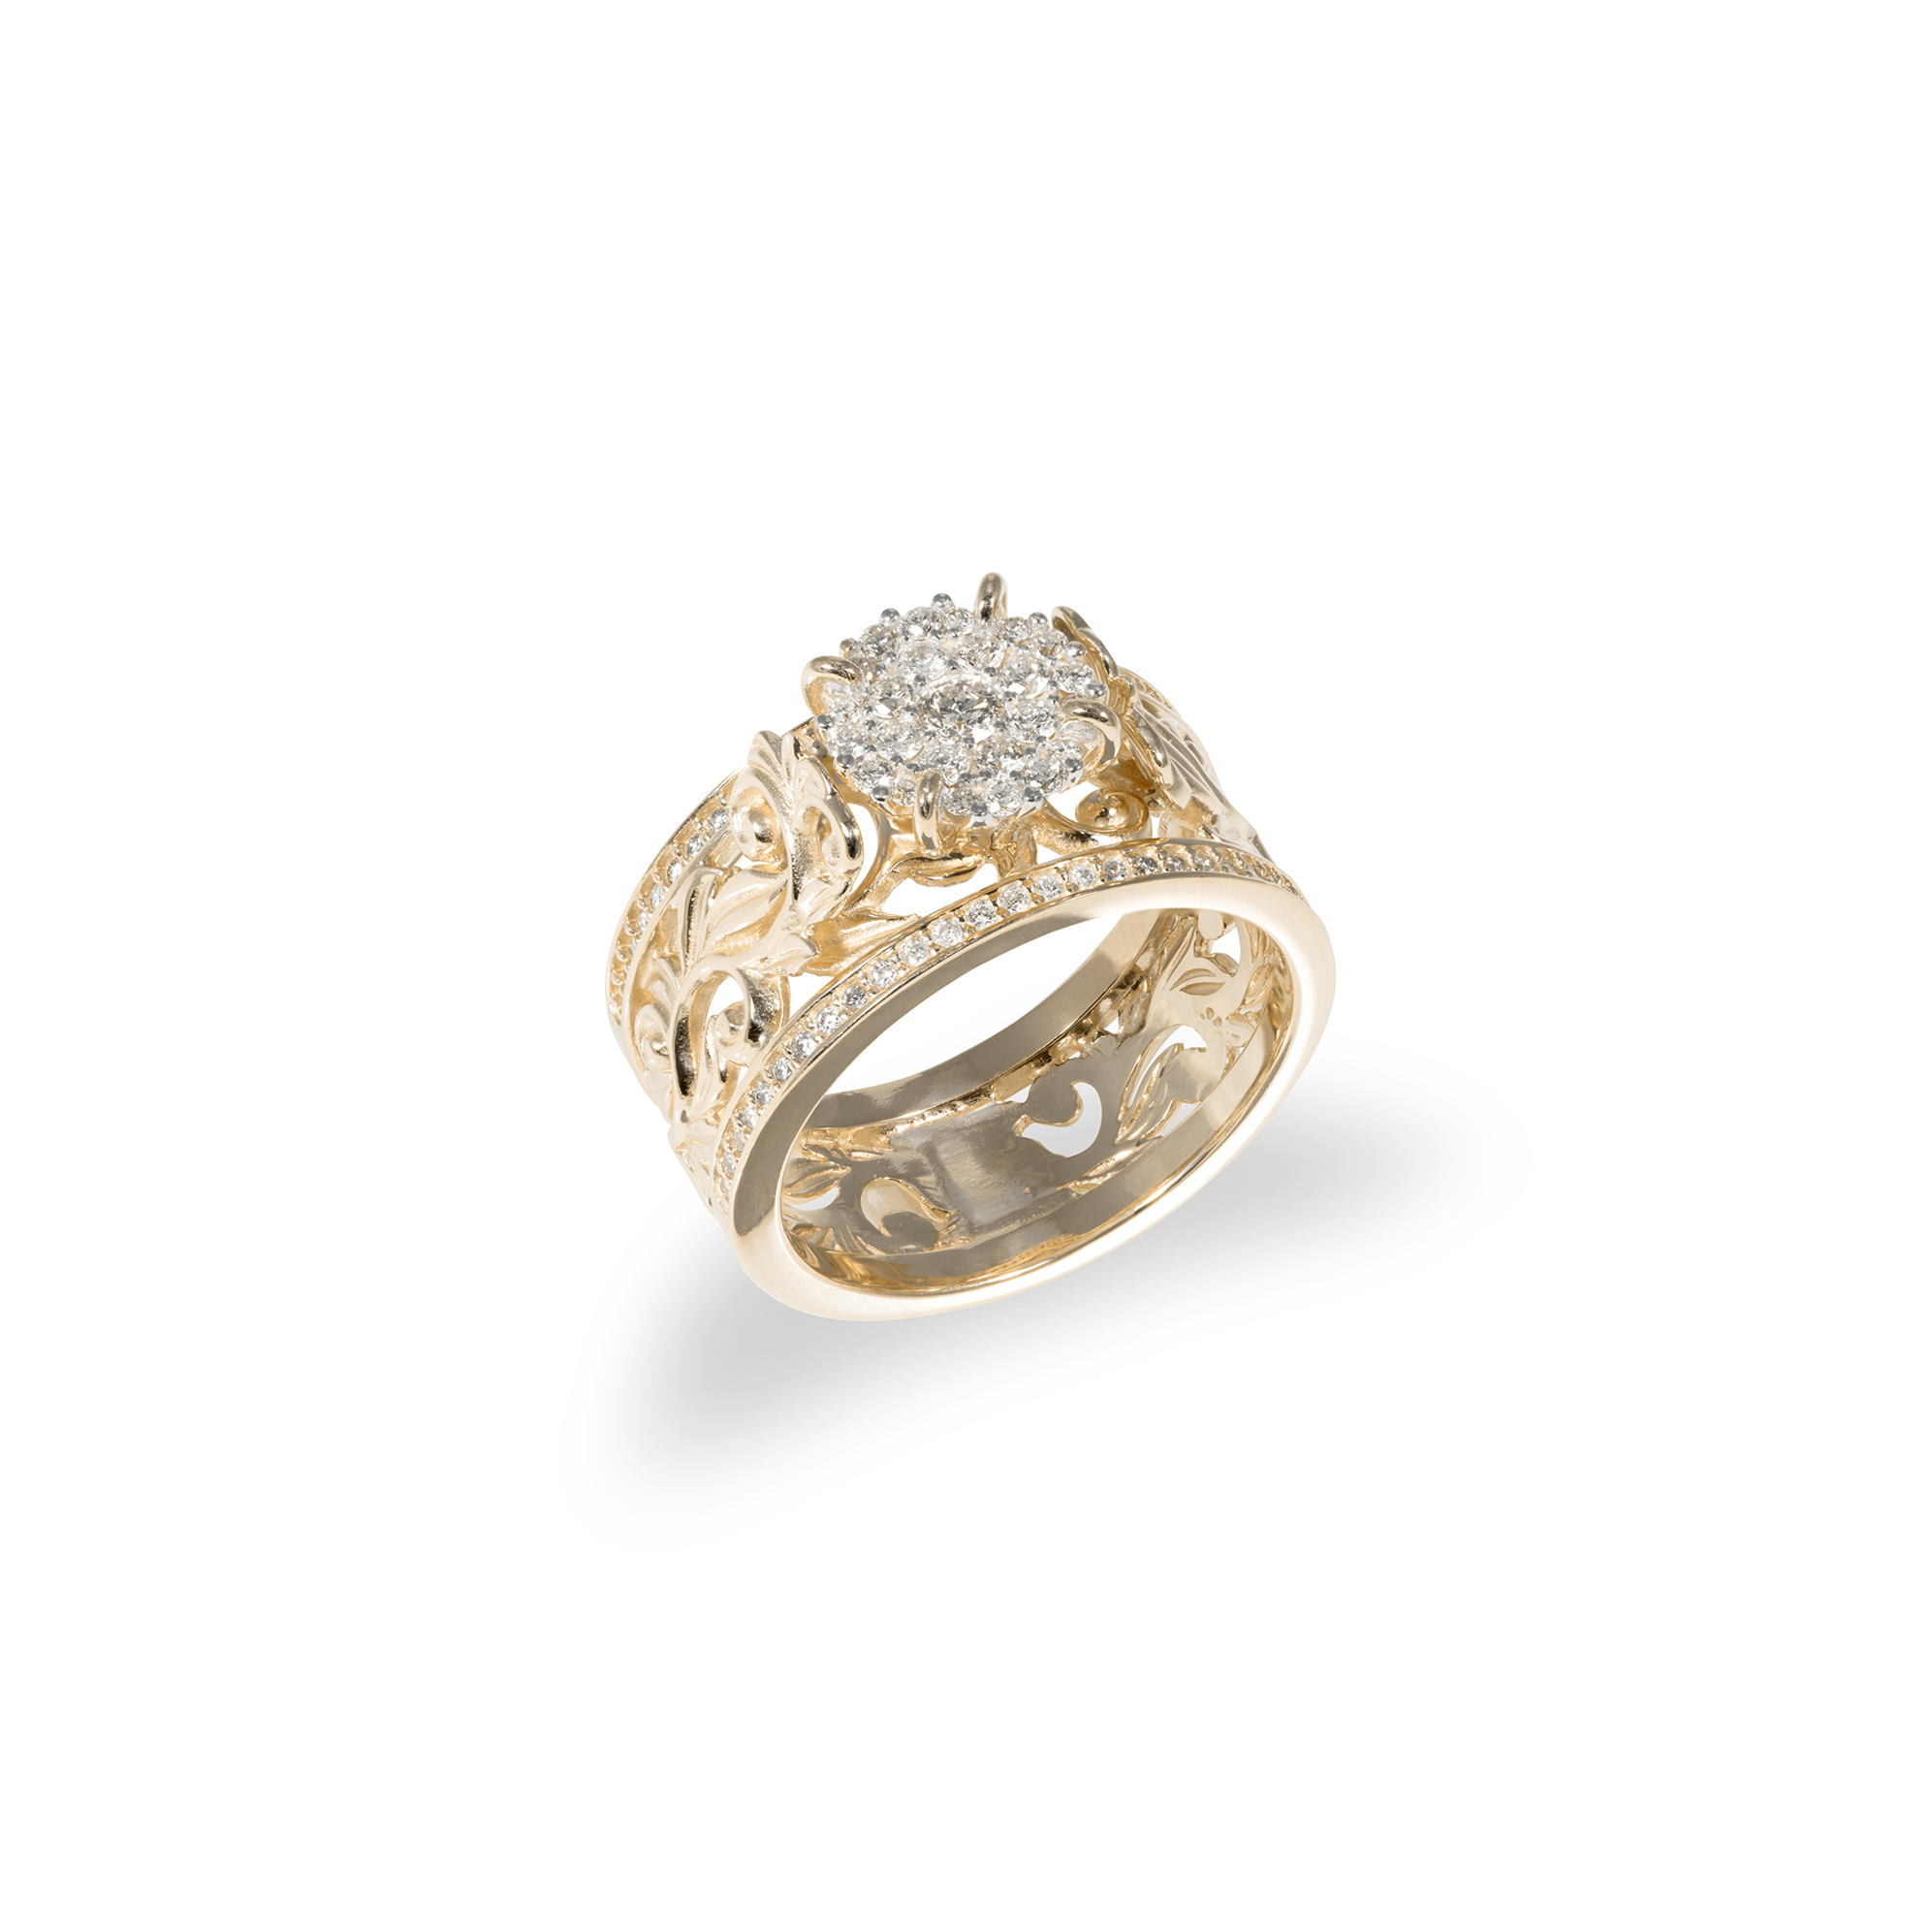 Living Heirloom Engagement Ring in Gold with Diamonds - 10mm